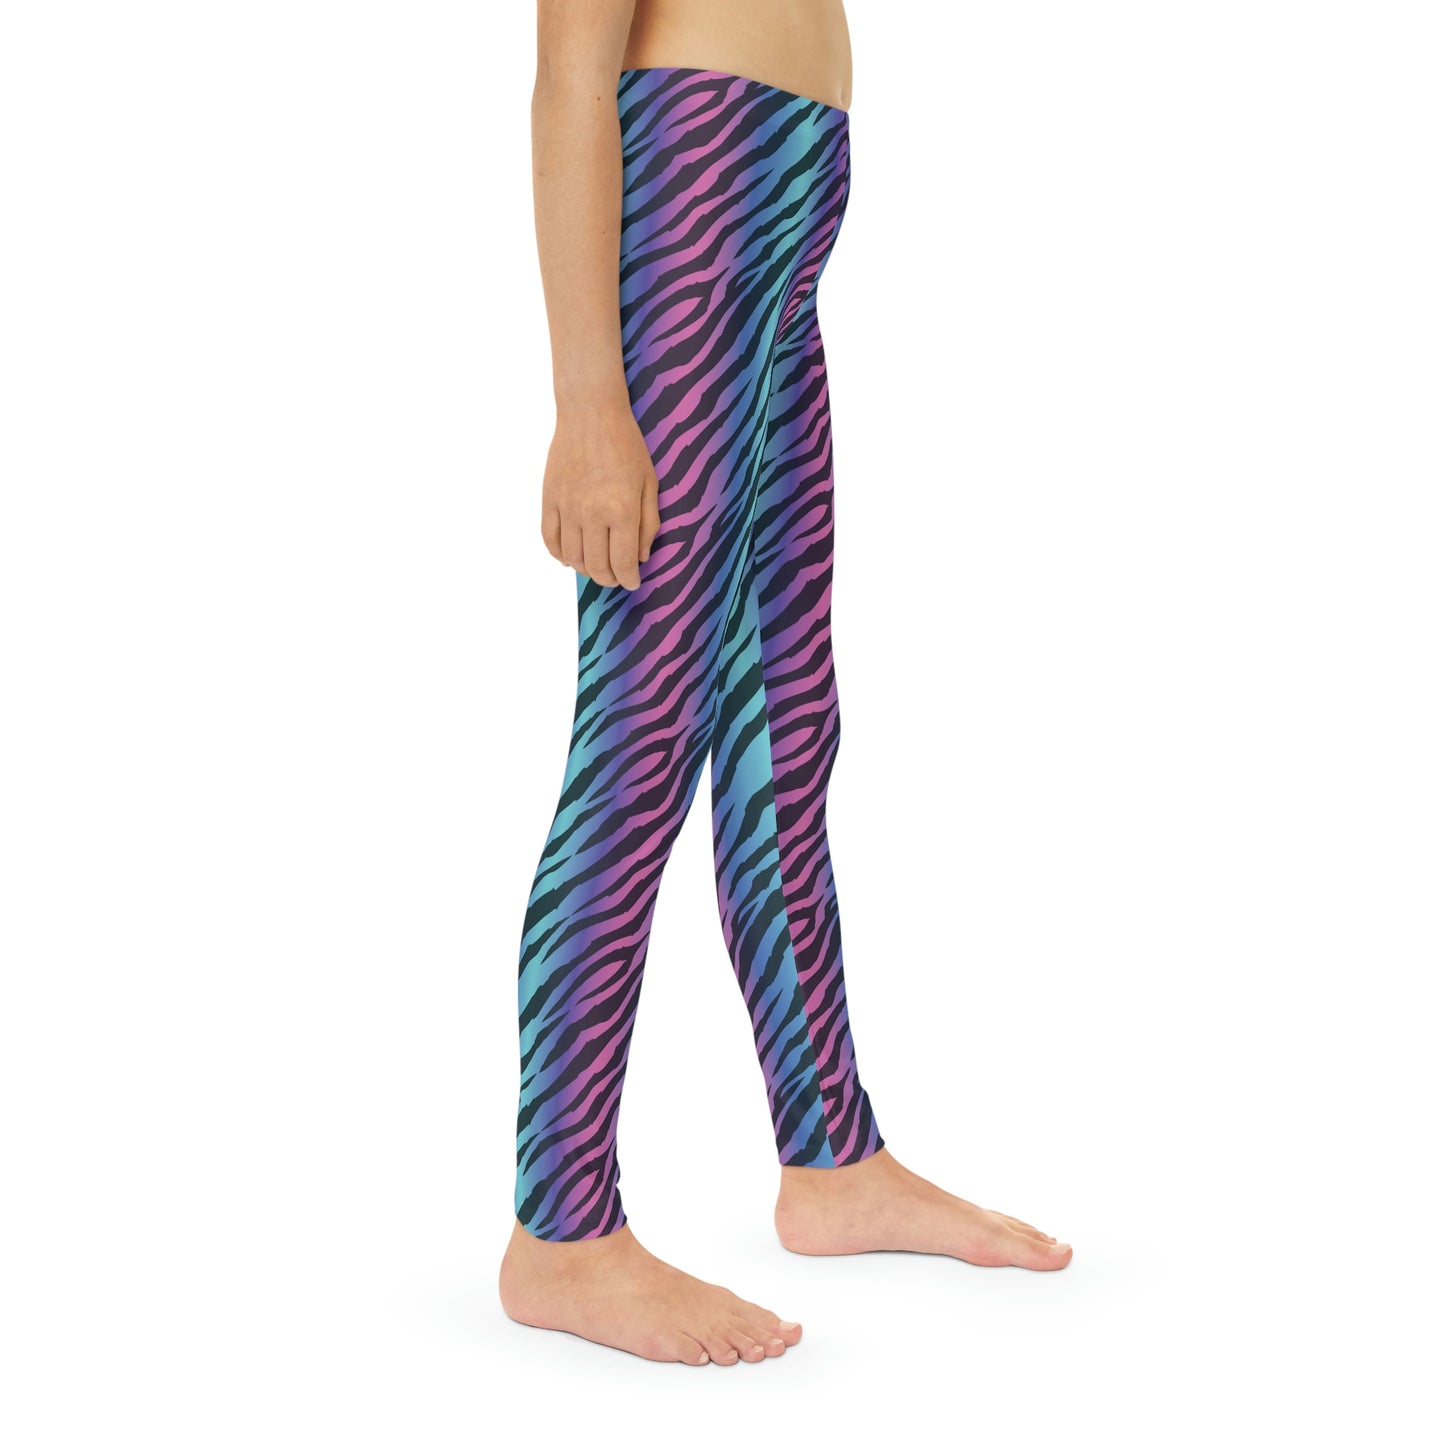 Rainbow Cute Summer Youth Leggings, One of a Kind Gift - Workout Activewear tights for kids, Granddaughter, Niece Christmas Gift